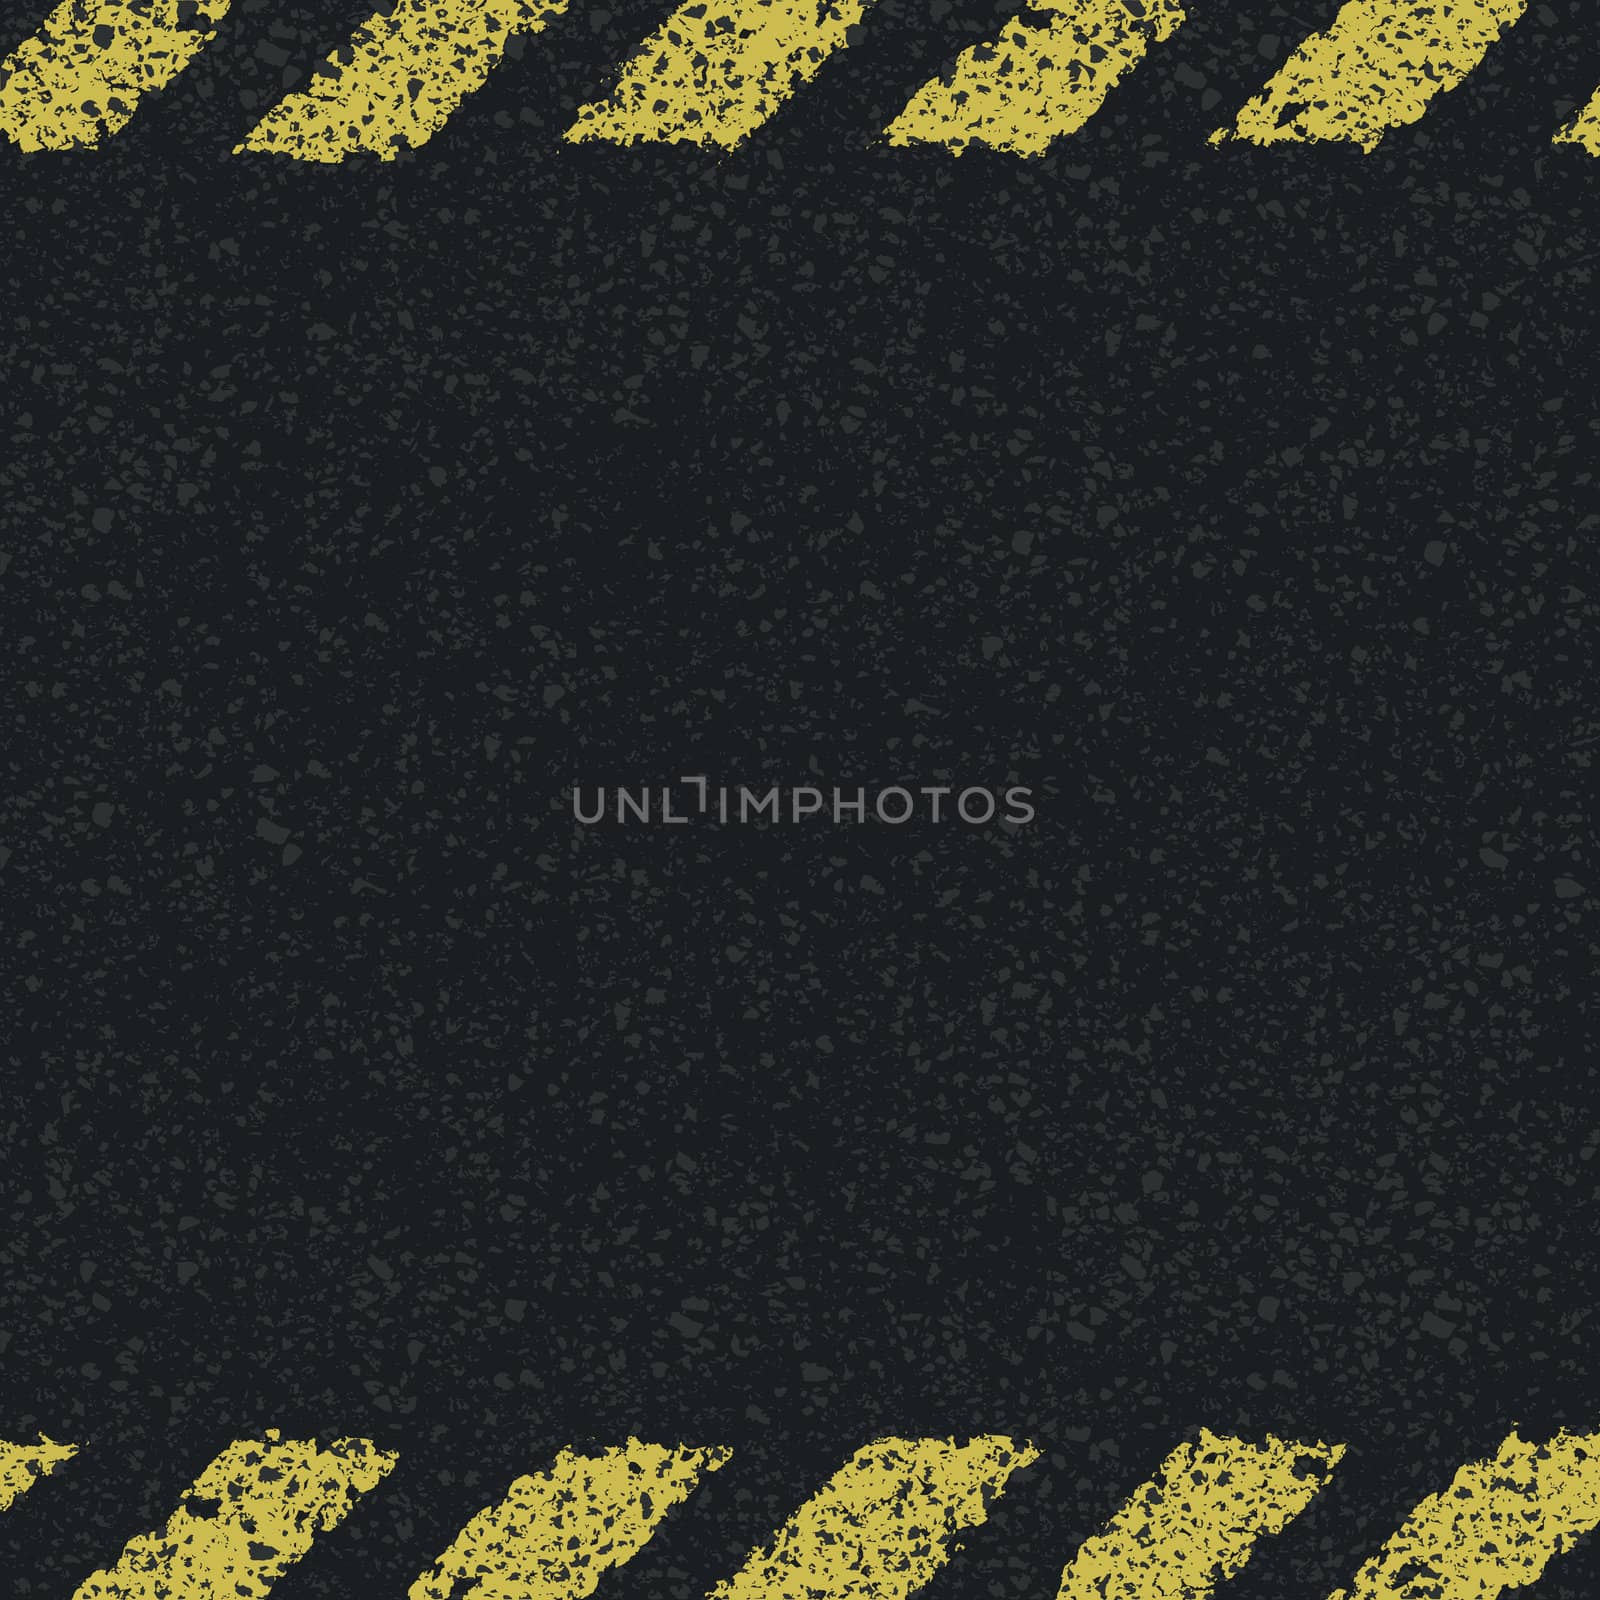 Hazard yellow lines background. Vector illustration, EPS8 by pashabo